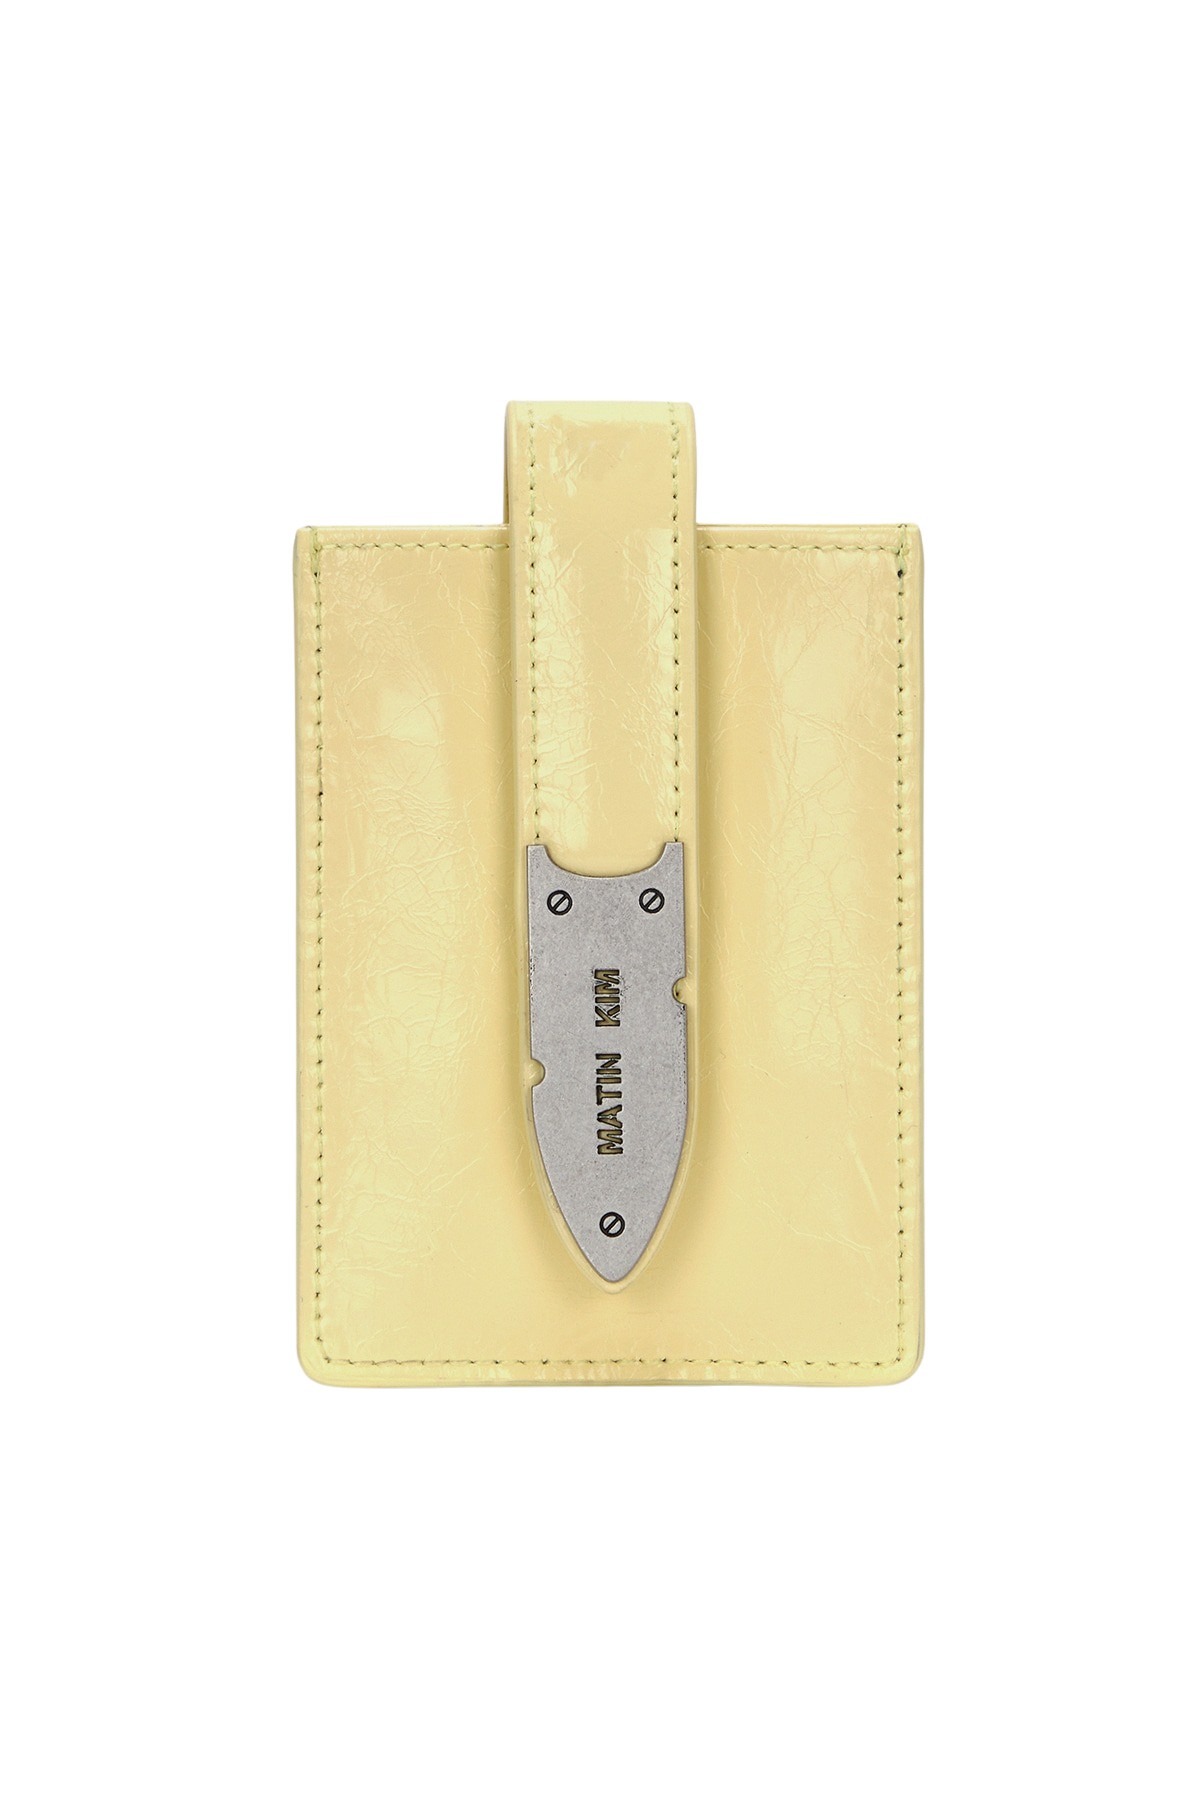 ACCORDION NECKLACE WALLET IN YELLOW